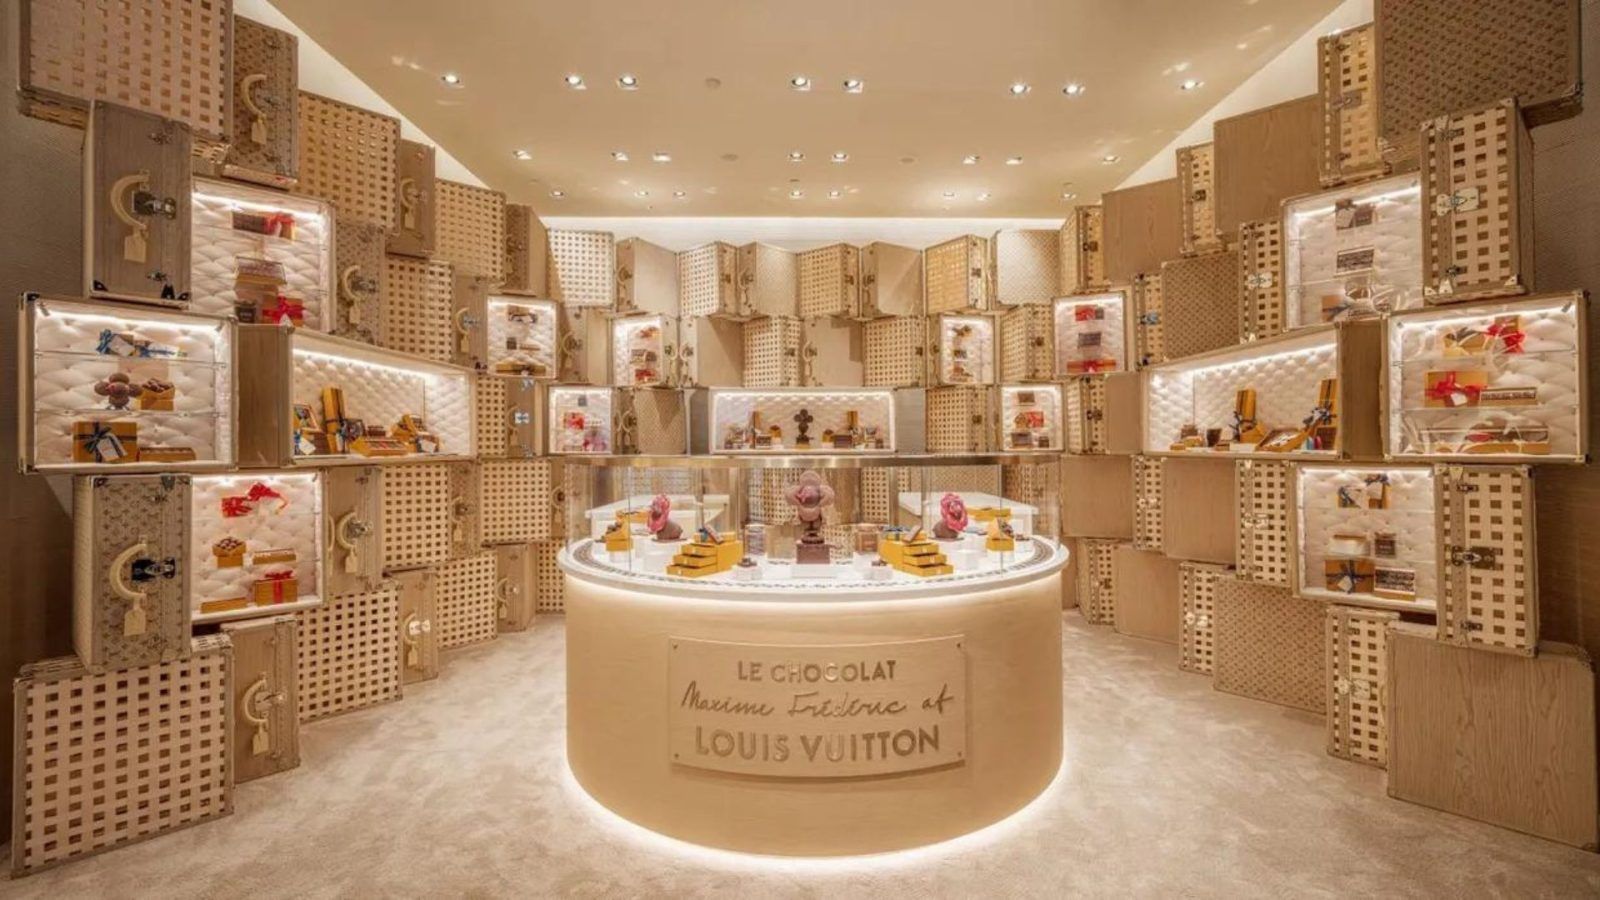 THIS POP-UP STORE IN SINGAPORE HAS EXCLUSIVE TAYLOR SWIFT